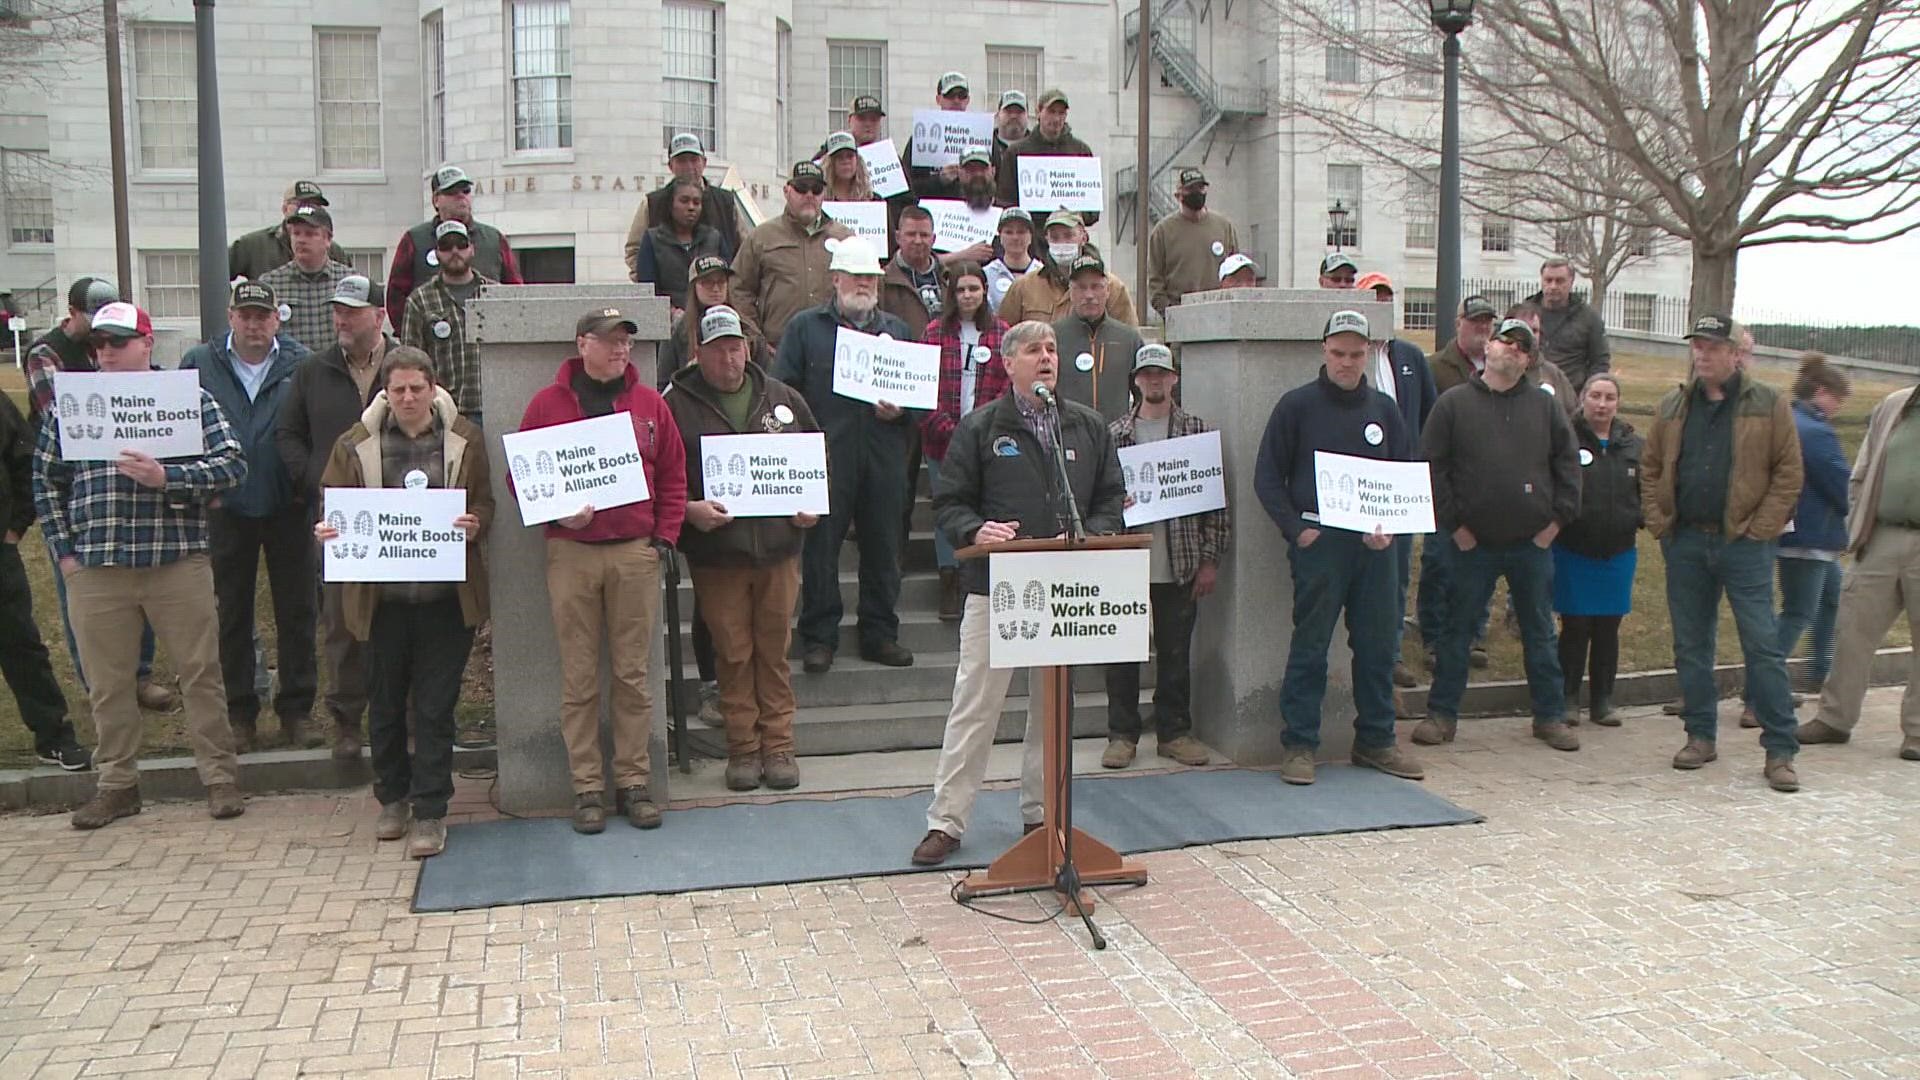 The Maine Work Boots Alliance says the ban could result in higher costs for farmers, ratepayers